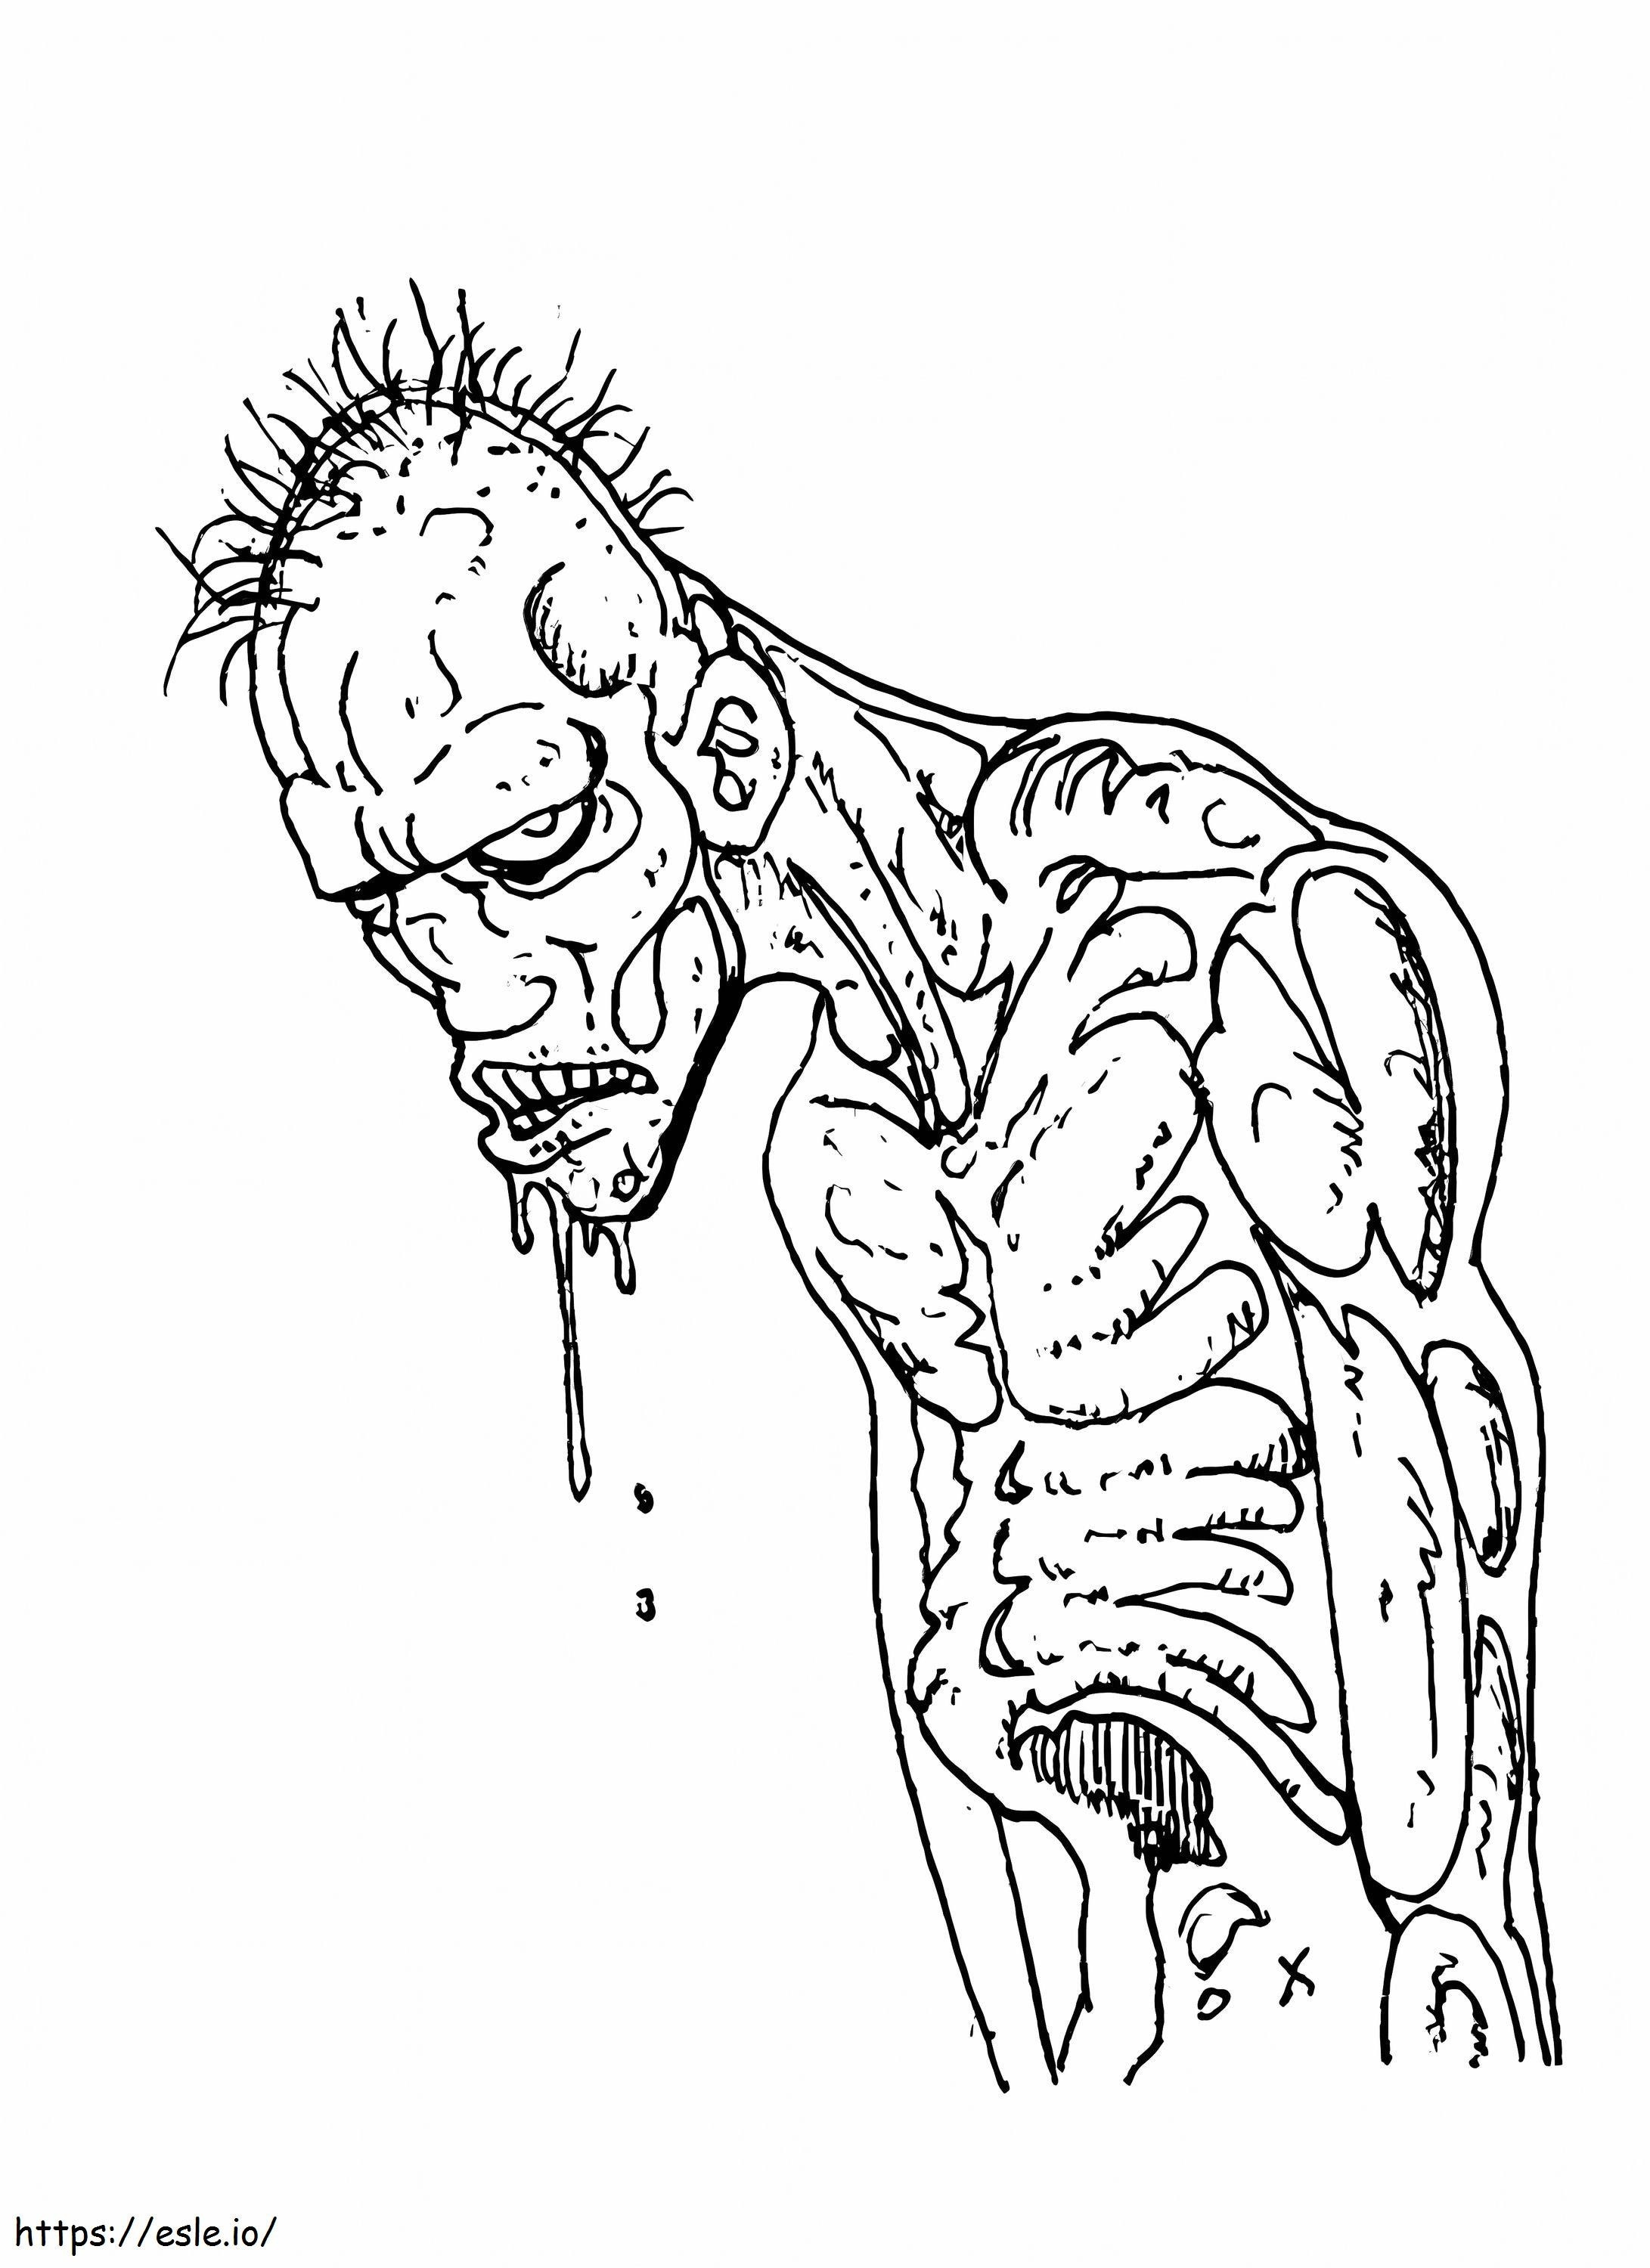 Hungry Zombie coloring page